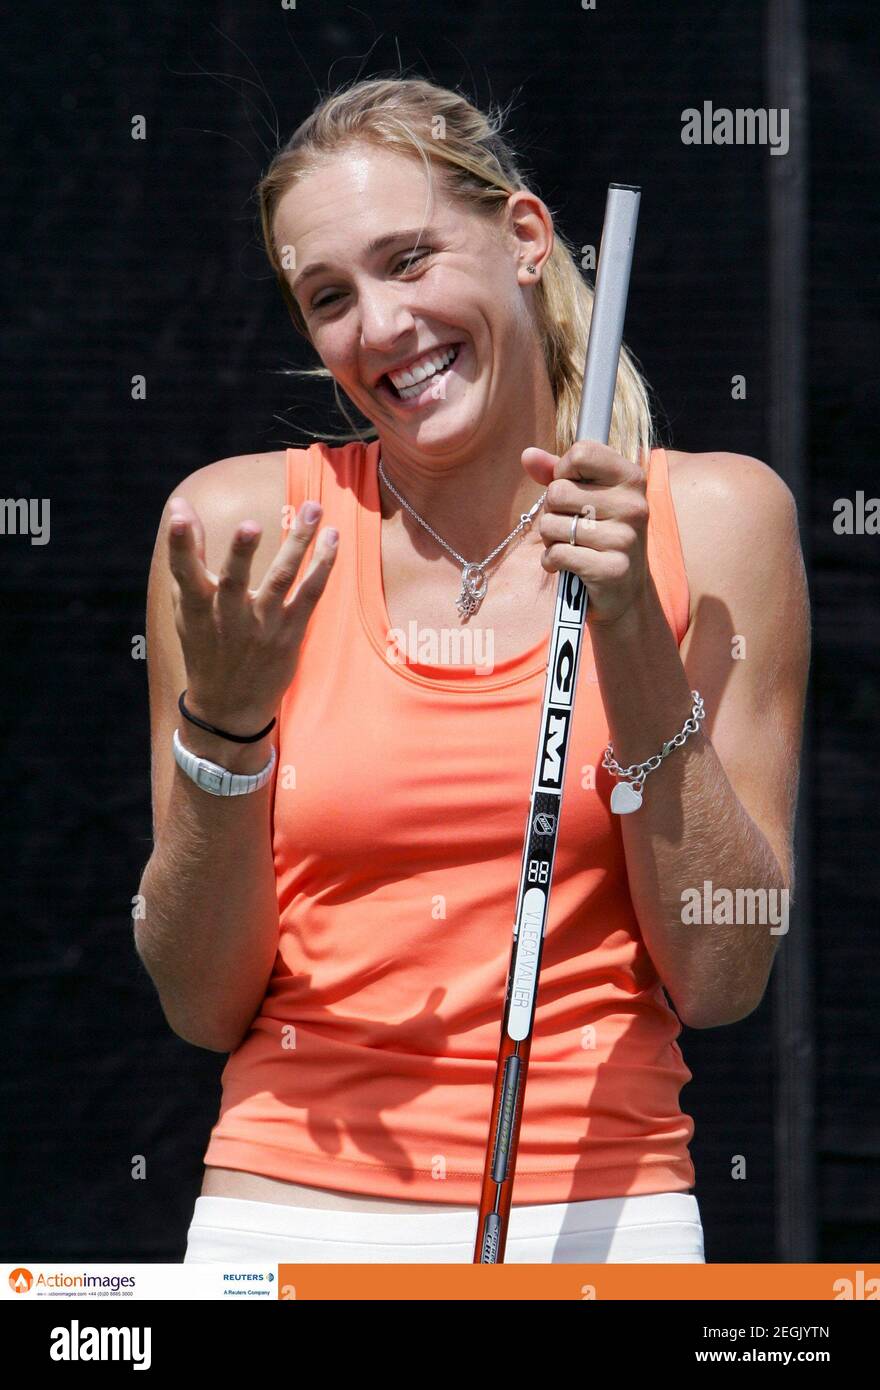 Tennis - Sony Ericsson WTA Tournament - Montreal, Canada - 12/8/06  Nicole Vaidisova of the Czech Republic reacts while being taught how to play hockey by NHL player Vincent Lecavalier (not pictured) during day one at the Rogers Cup, Sony Ericsson WTA Tour  Mandatory Credit: Action Images / Chris Wattie  Livepic Stock Photo